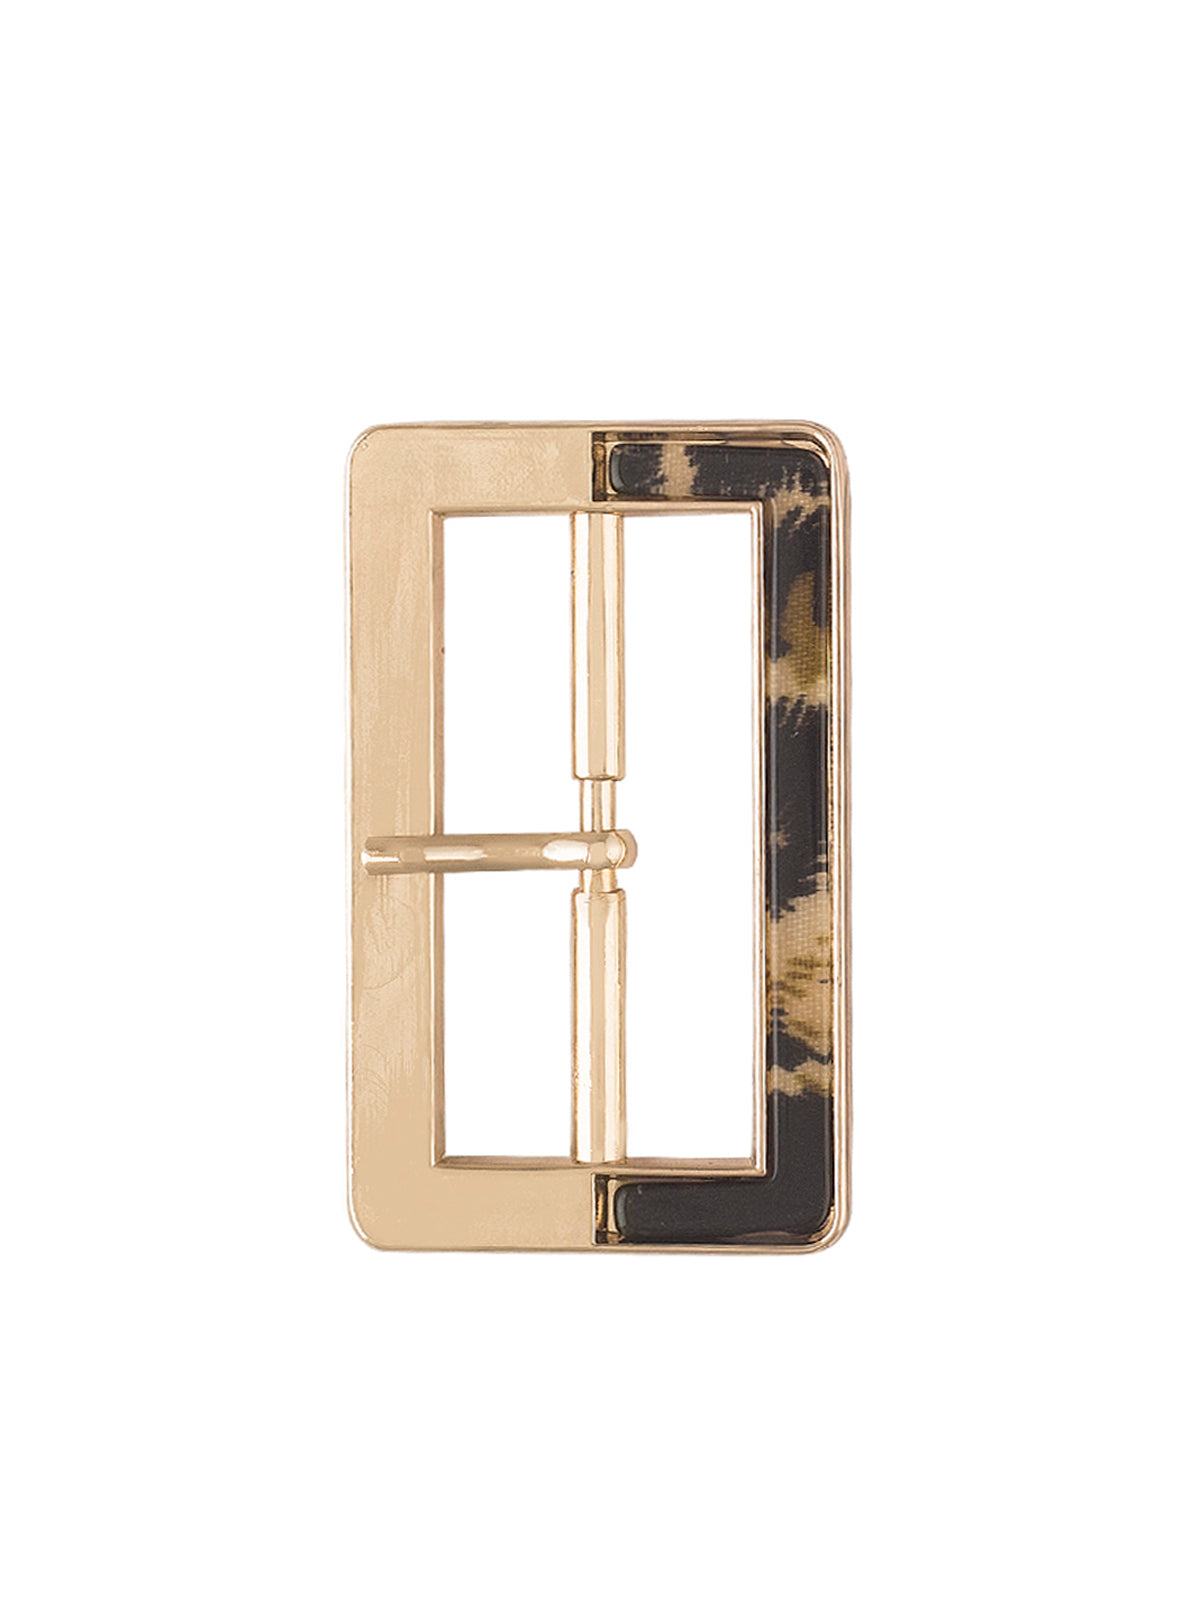 Classic Shiny Gold with Leopard Print Belt Buckle with Prong